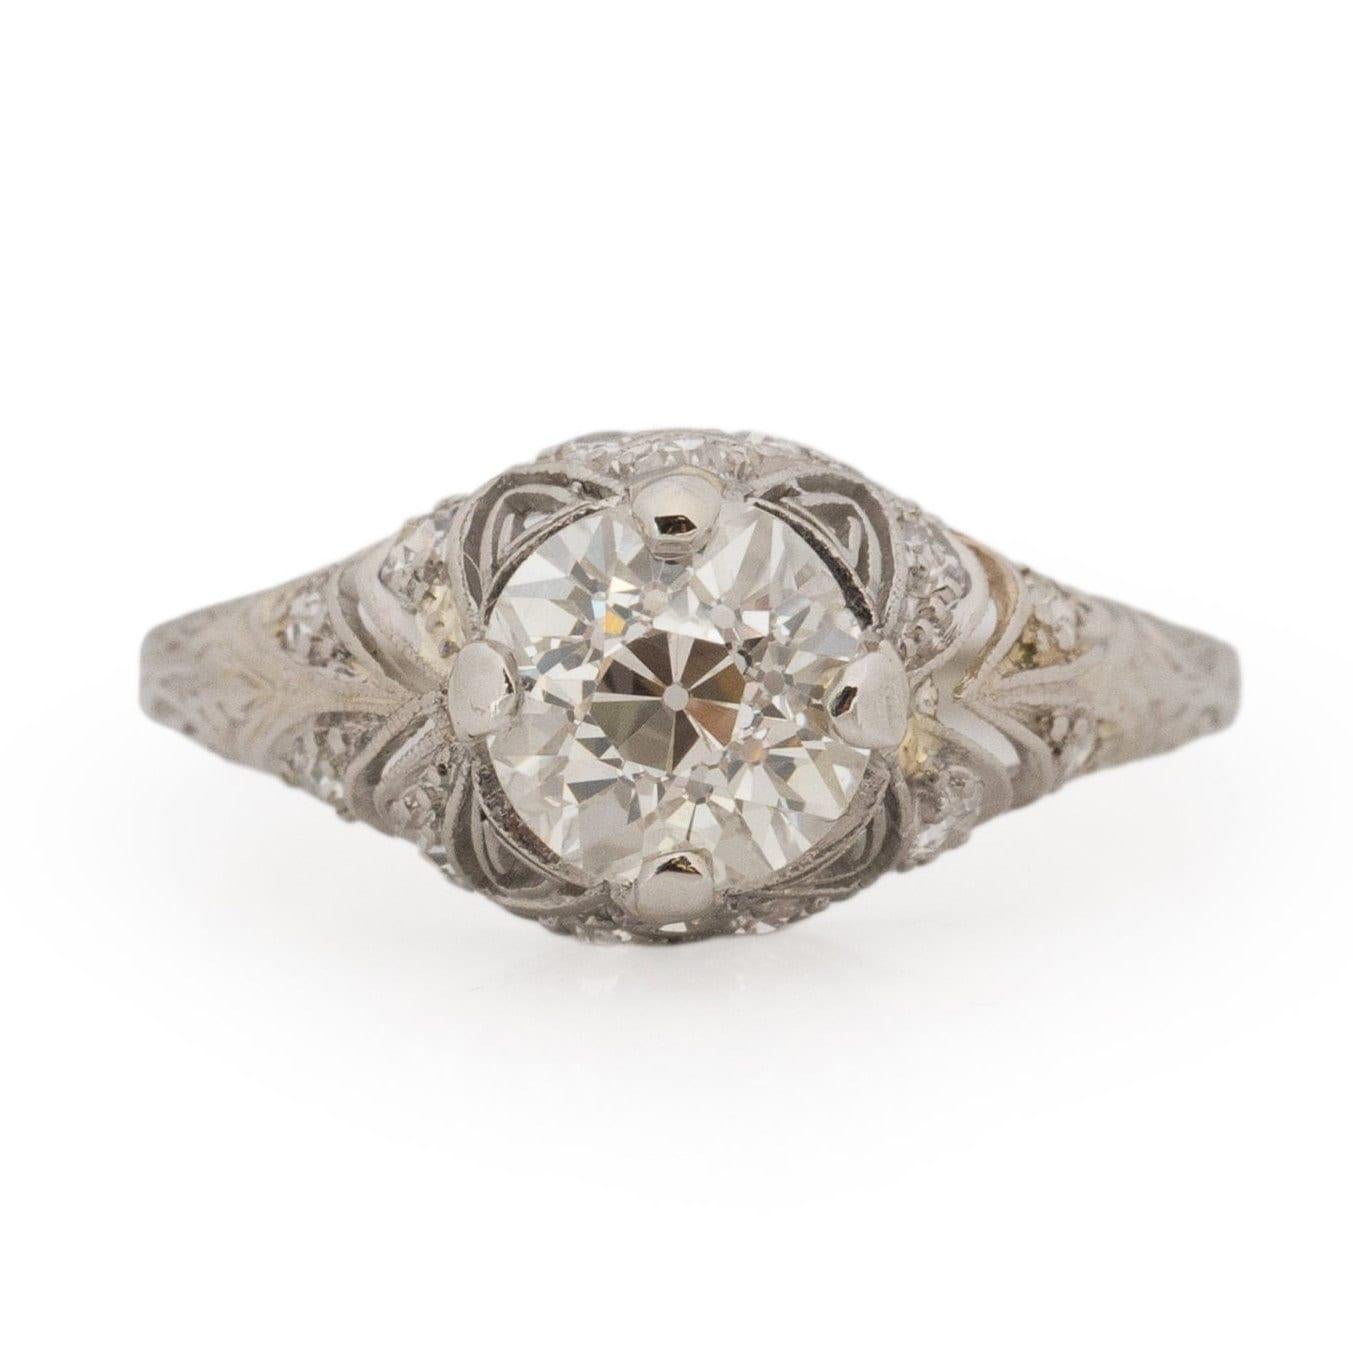 Transporting you to the Art Deco era, this exquisite piece embodies the geometric elegance reminiscent of the great Gatsby era. Meticulously fashioned in platinum, a solitaire old European cut diamond graces the pinnacle of an elegant cathedral